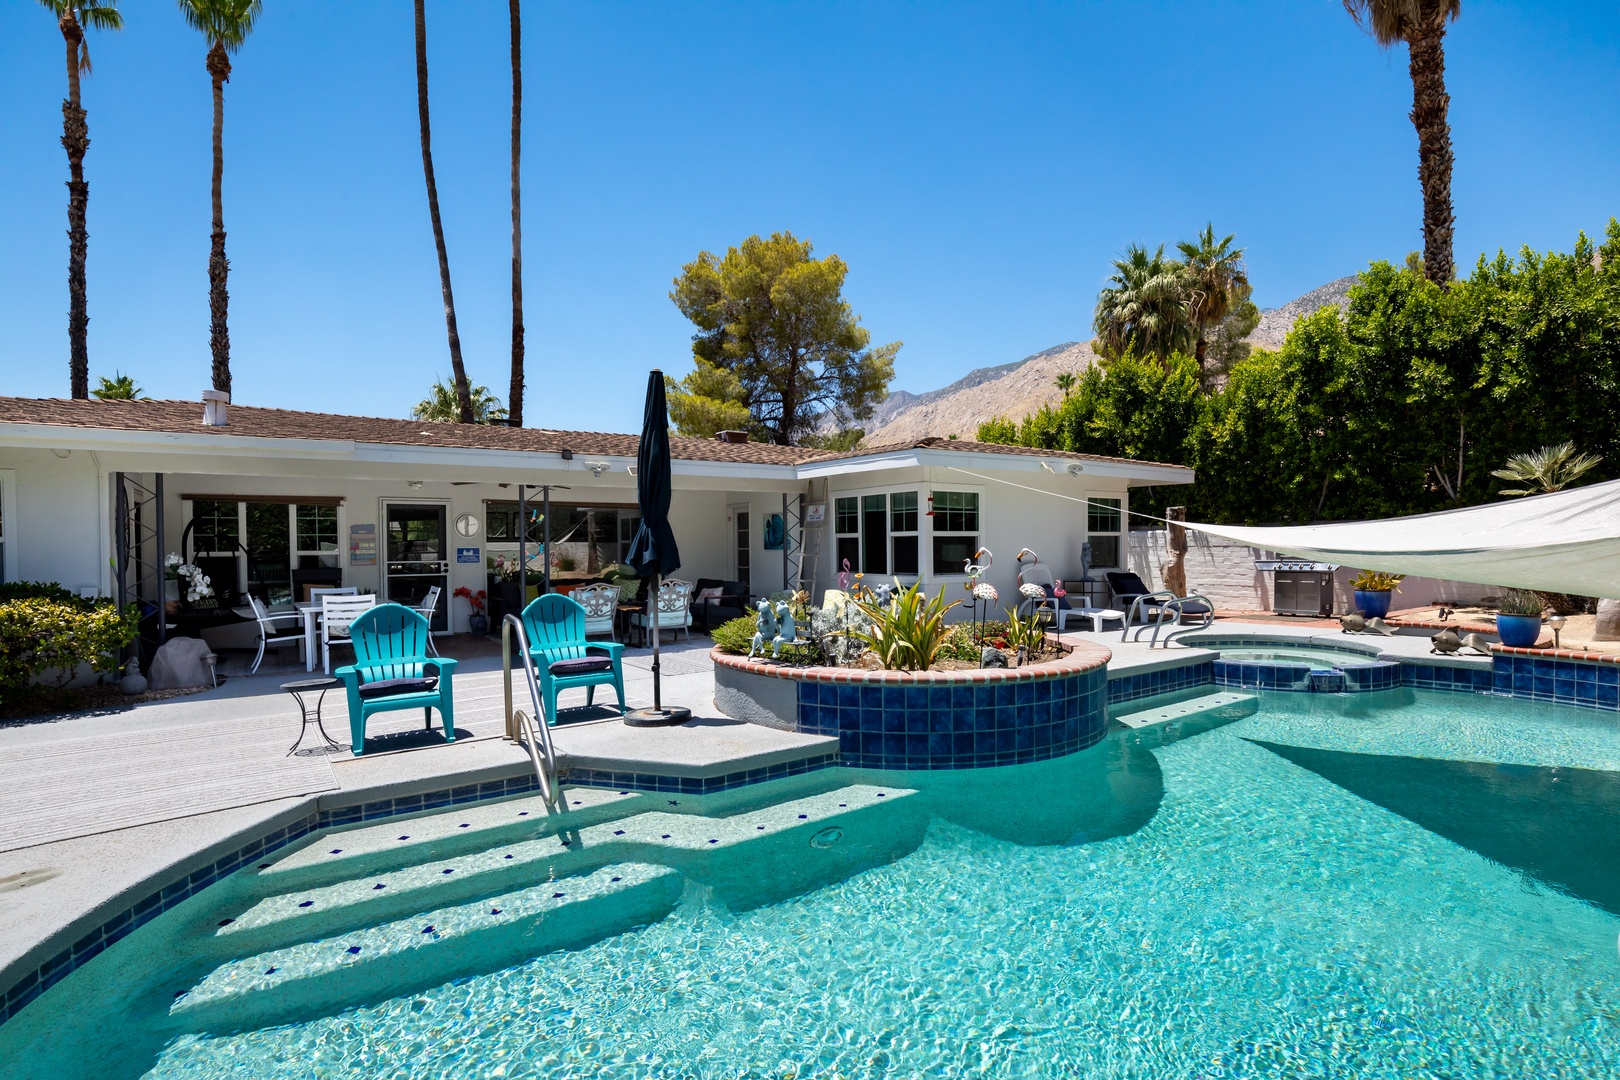 Private instagrammable pool with ample outdoor seating!